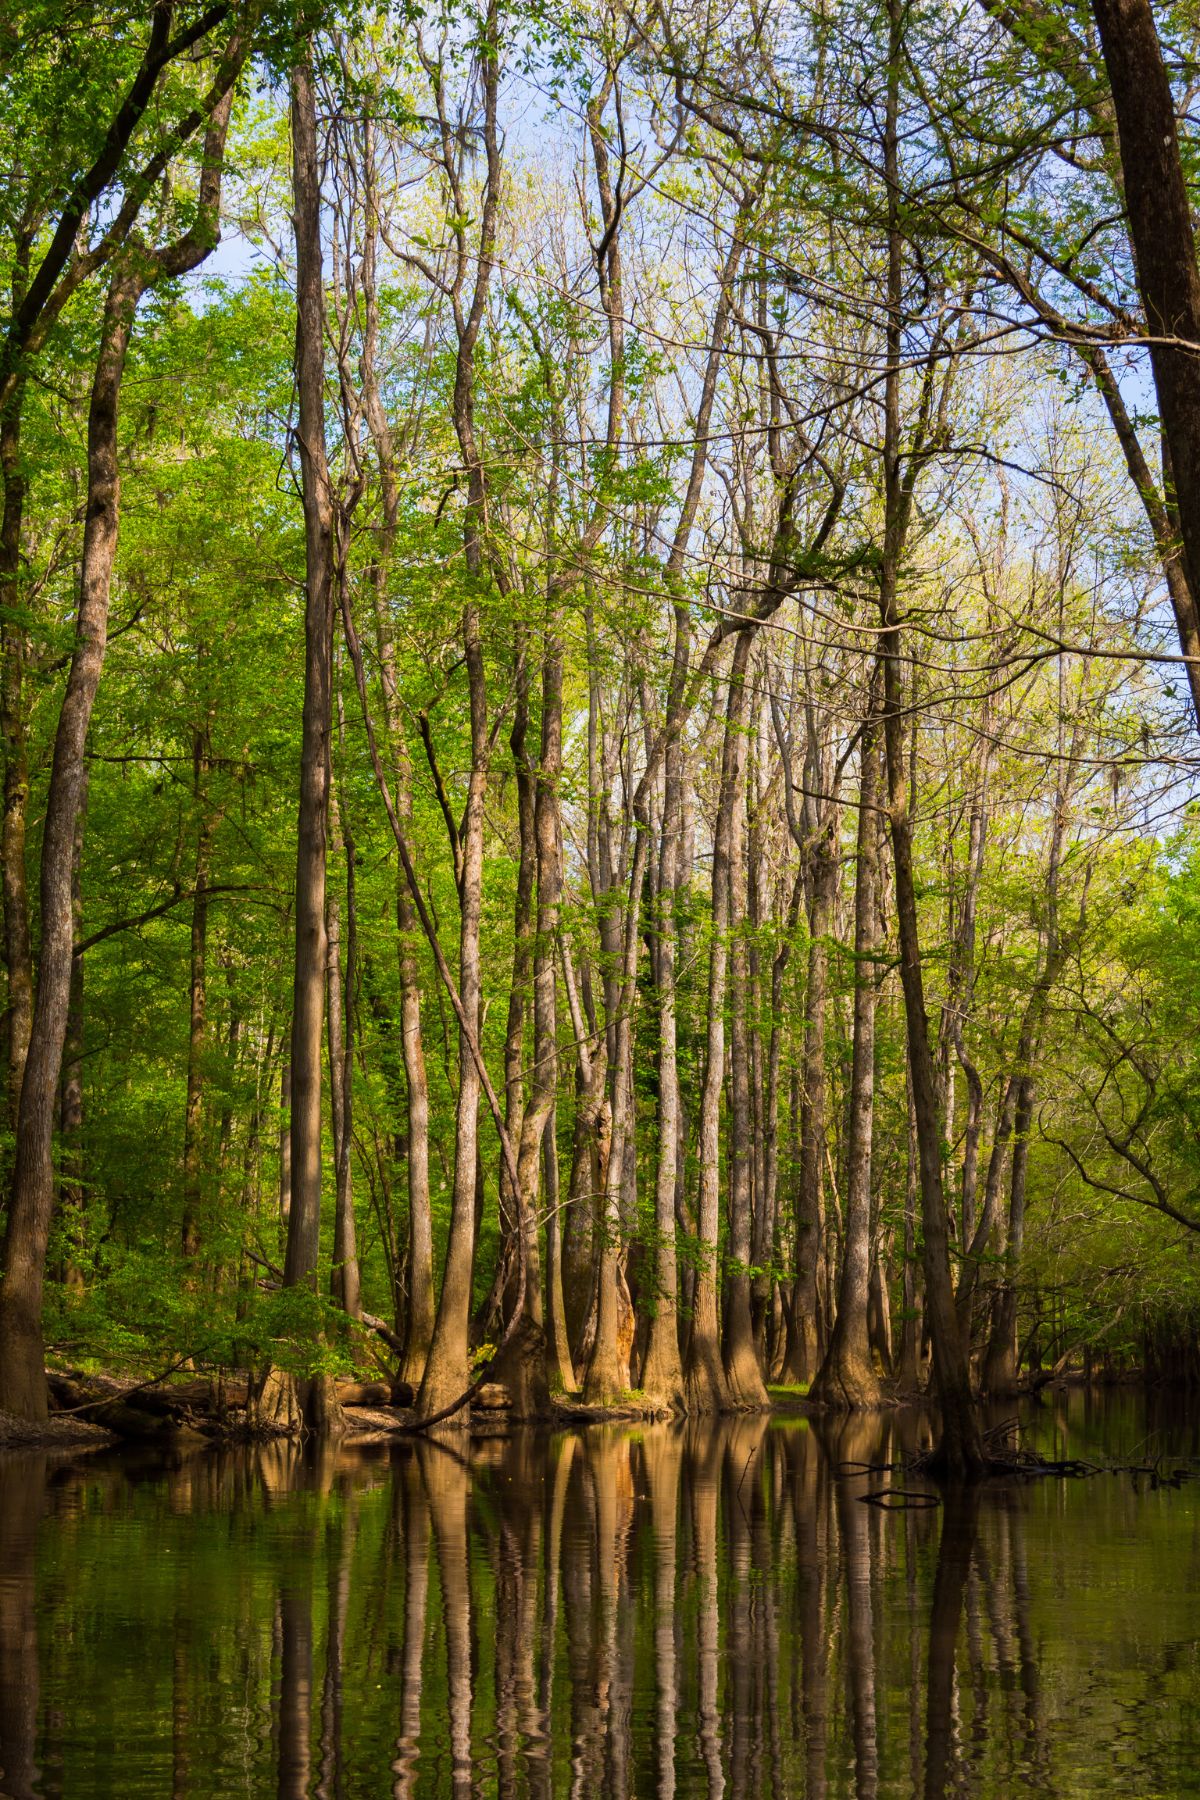 Trees reflecting in the water at Congaree National Park